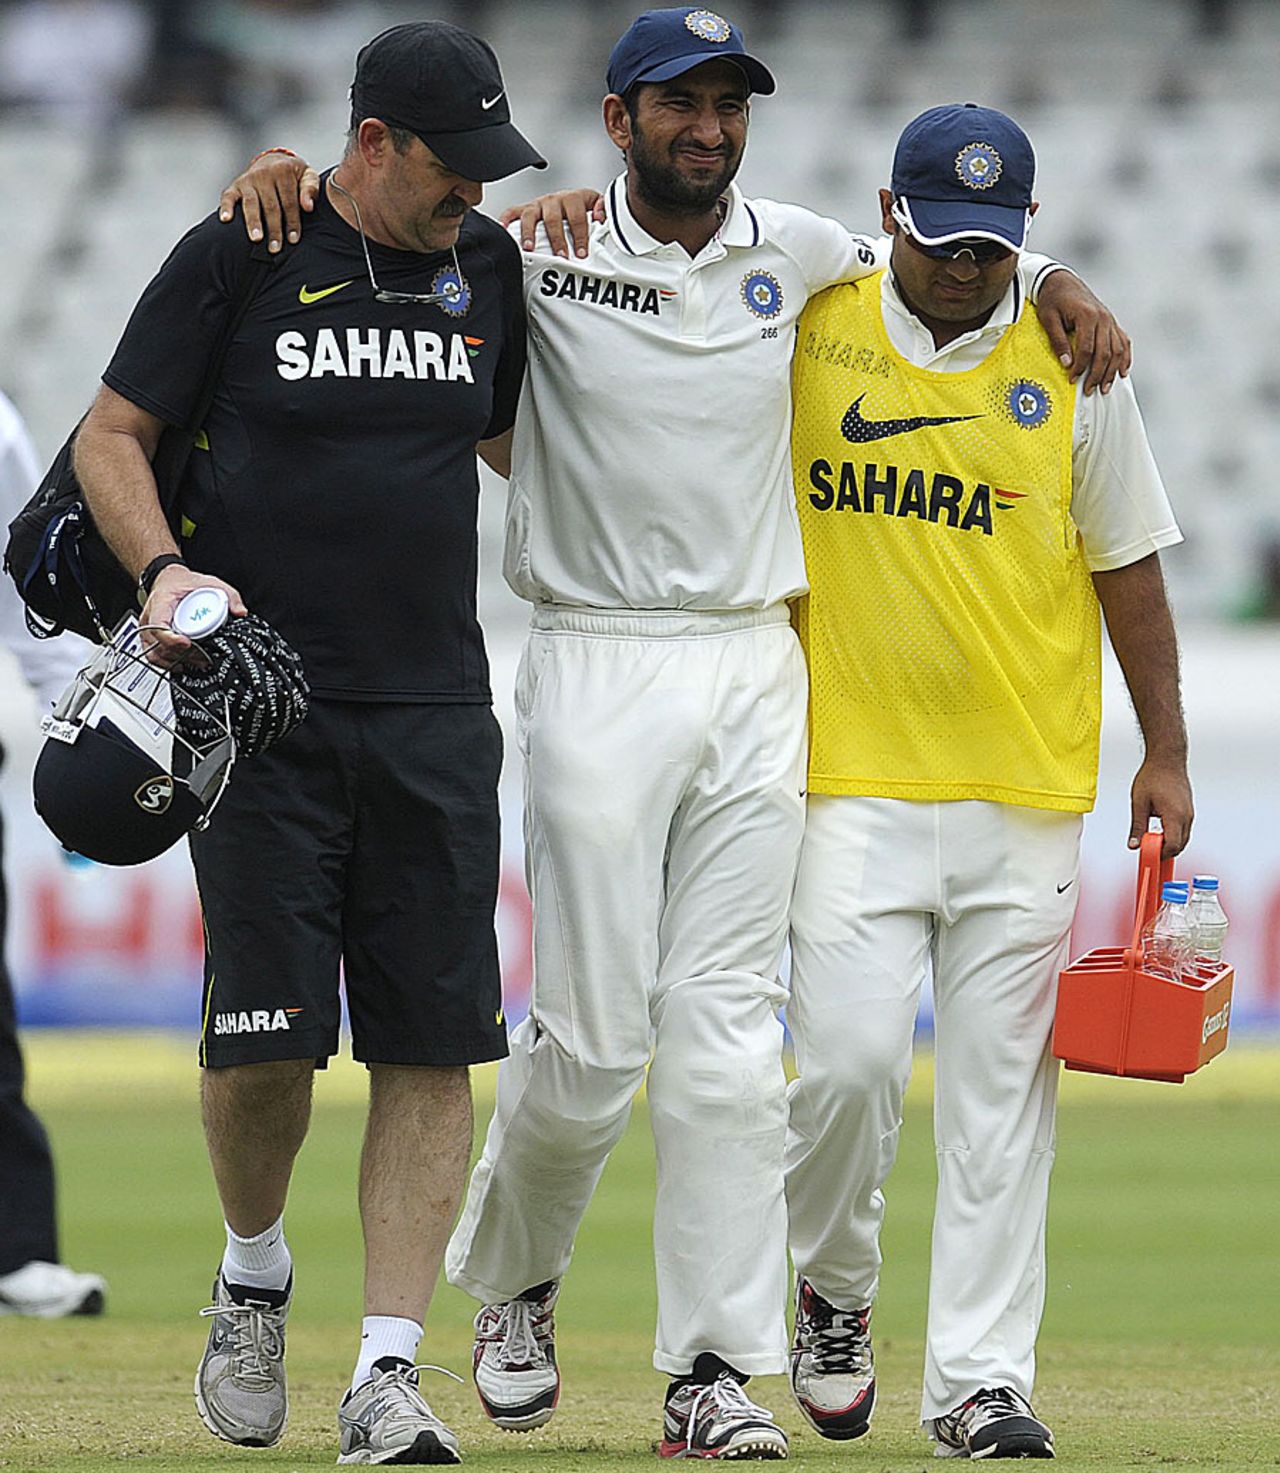 An injured Cheteshwar Pujara is led off the field, India v New Zealand, 1st Test, Hyderabad, 4th day, August 26, 2012